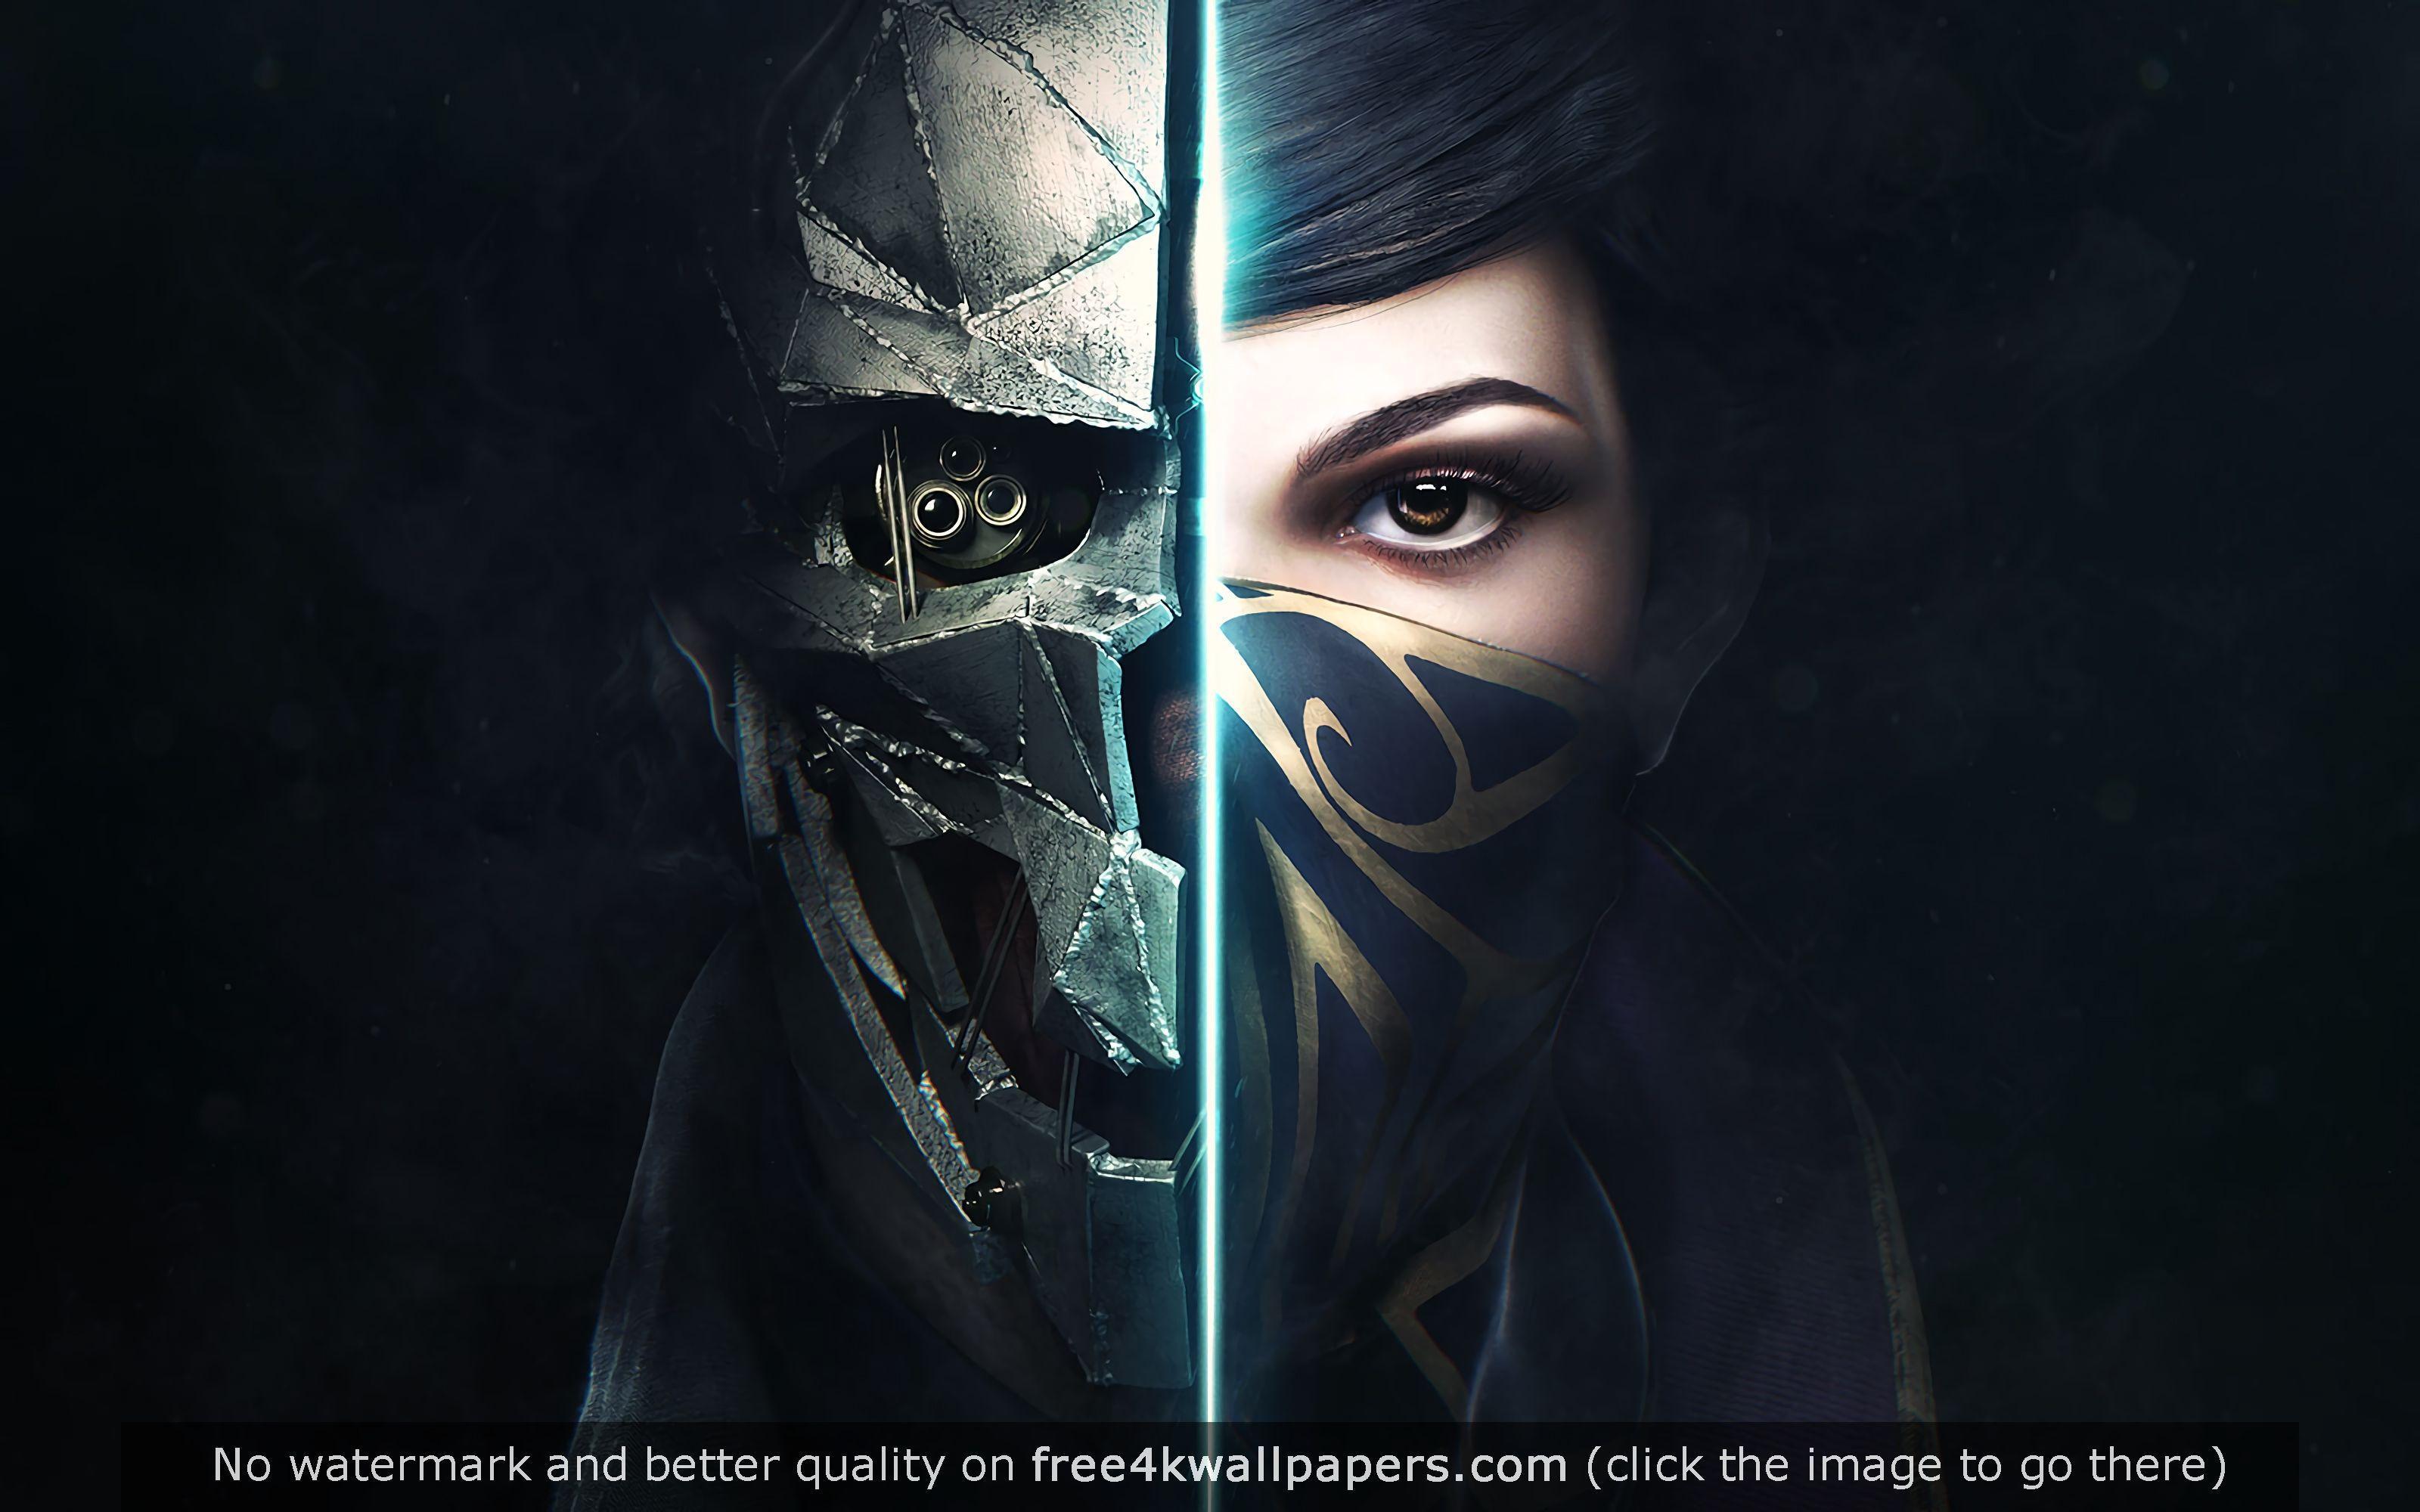 dishonored wallpaper and desktop background up to 8K 7680x4320